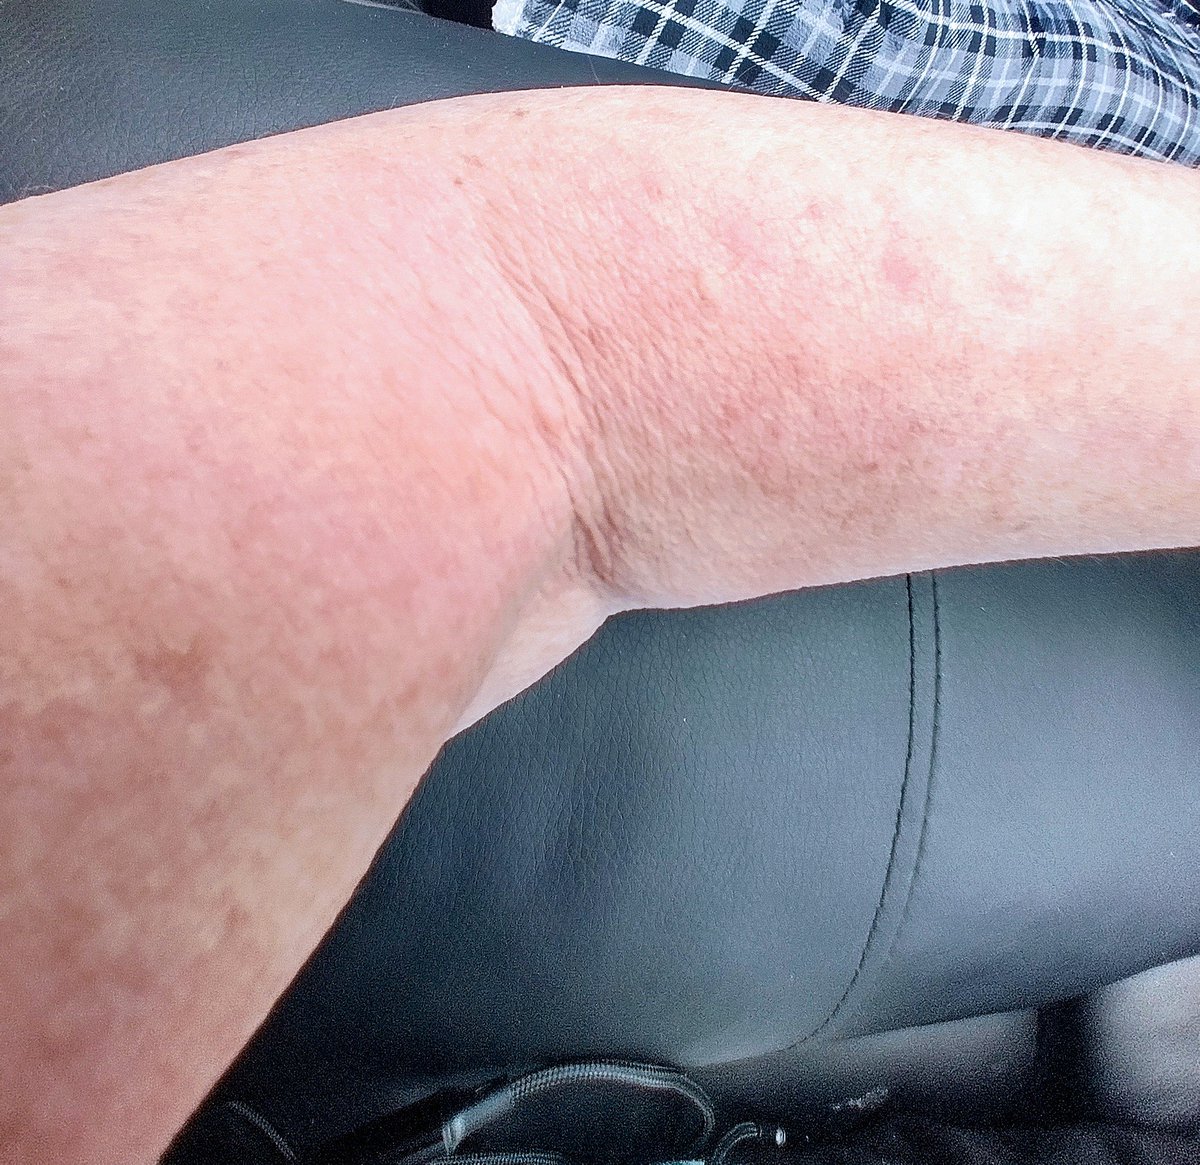 For the few blimmin minutes I was in the sun today 😩 I sit in the shade to be safe. Rash is driving me nuts, non stop itching 😩. Tried every cream ever invented. Anyone have tips or remedies? #sunallergy #dracula